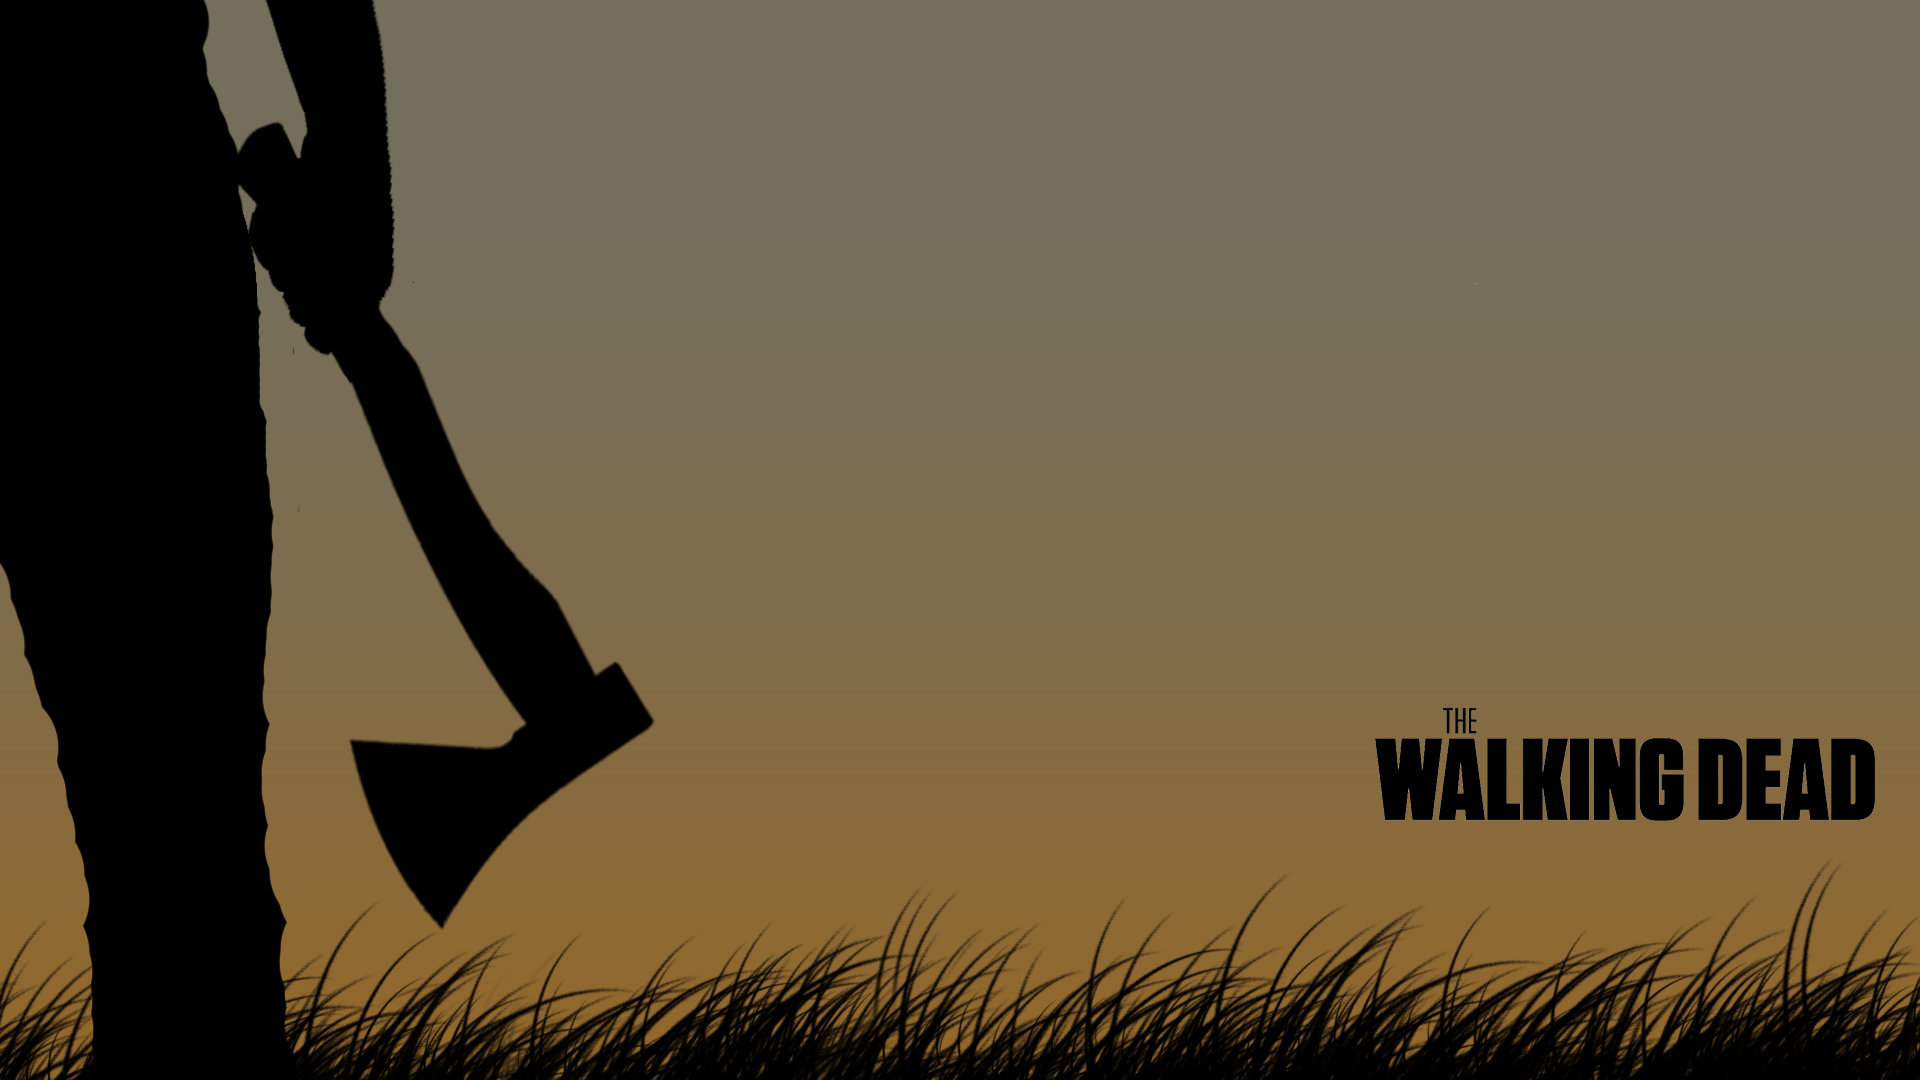 the walking dead wallpaper,sky,font,silhouette,grass,photography